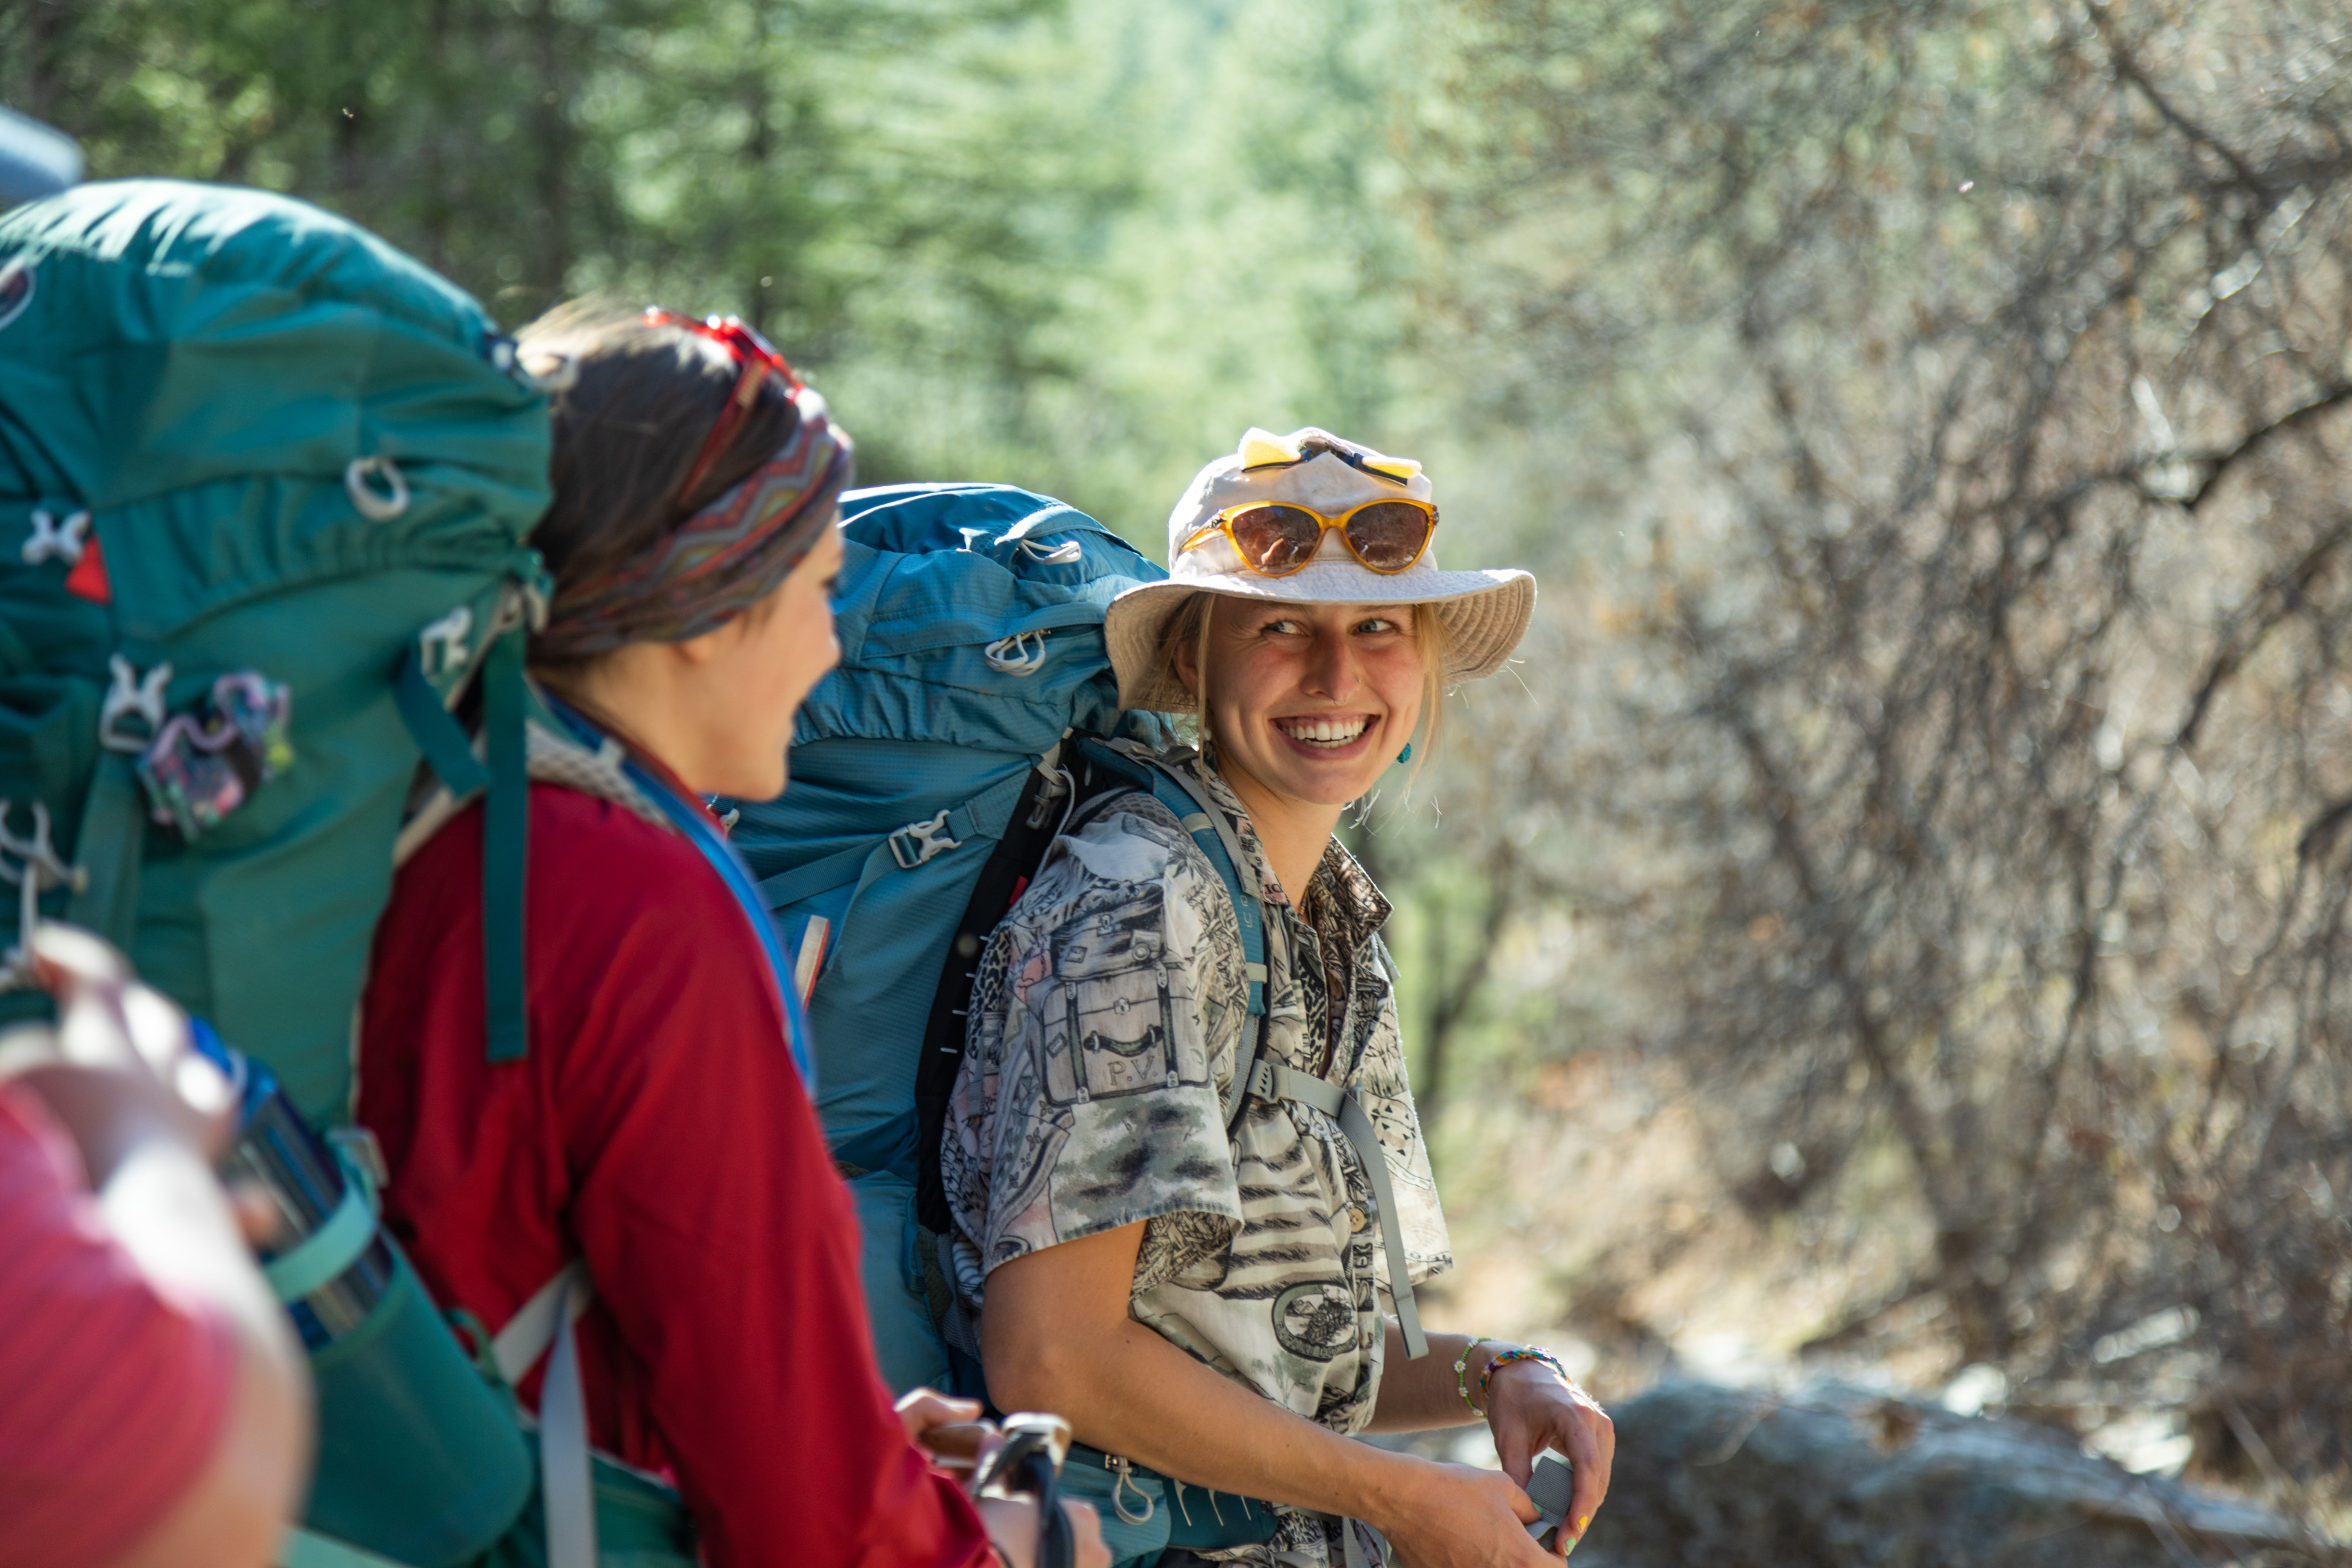 Students smiling at each other in outdoor landscape, wearing large hiking backpacks.